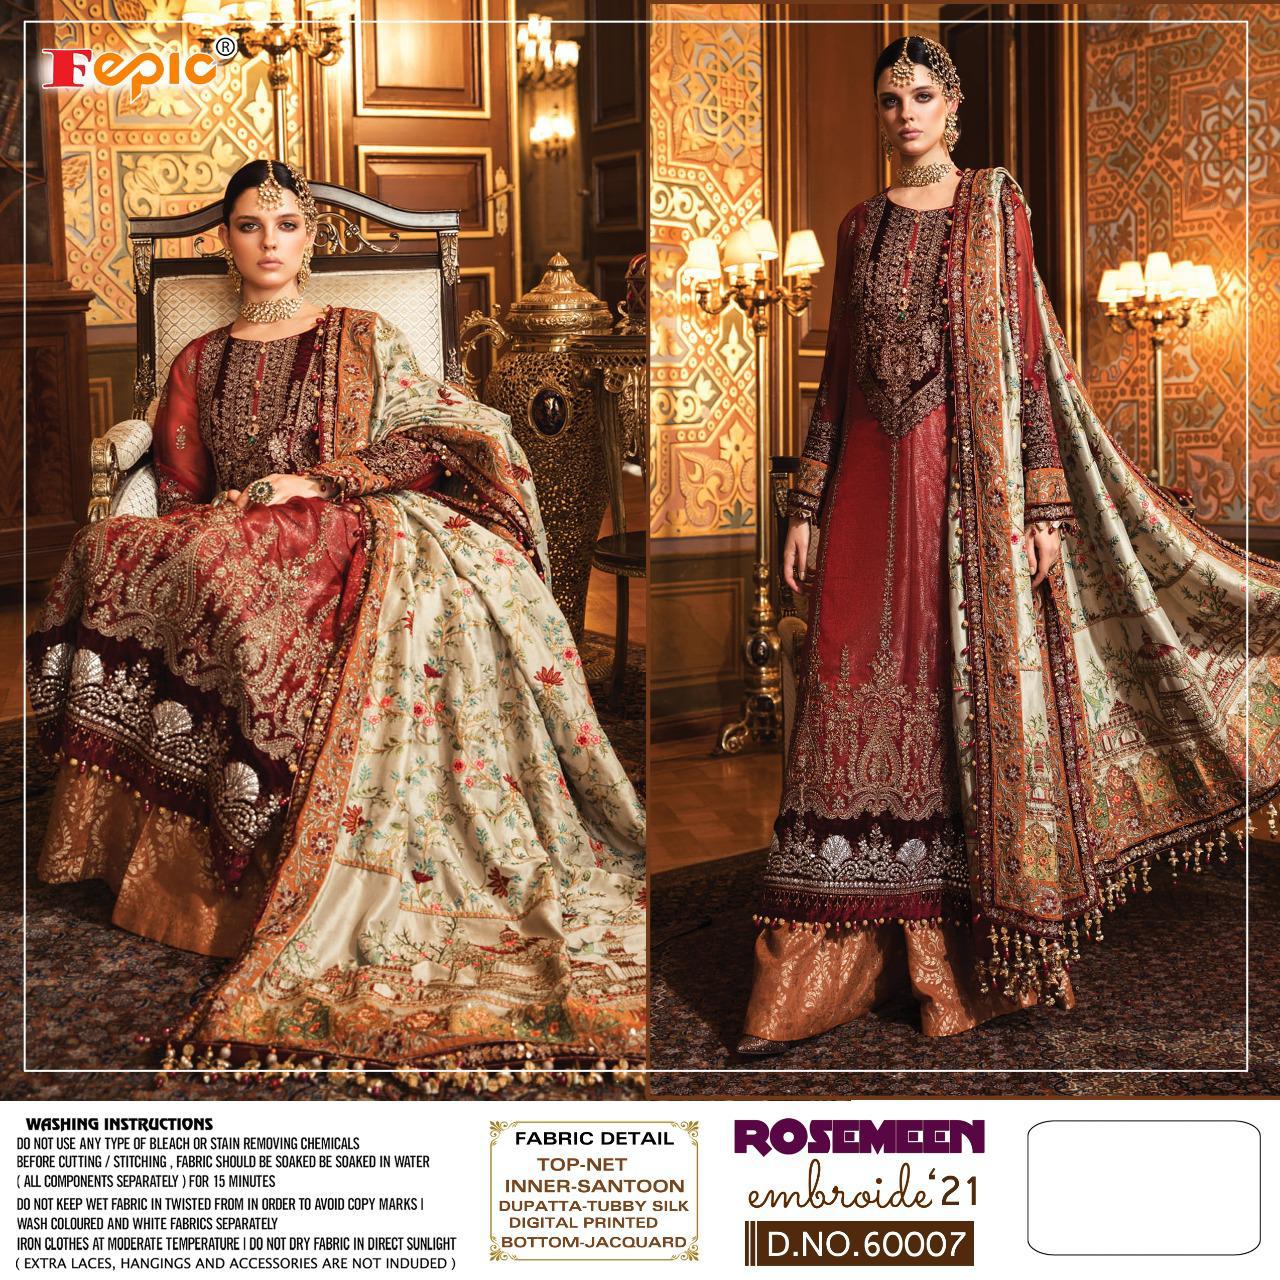 Fepic Rosemeen Embroide-21 60007